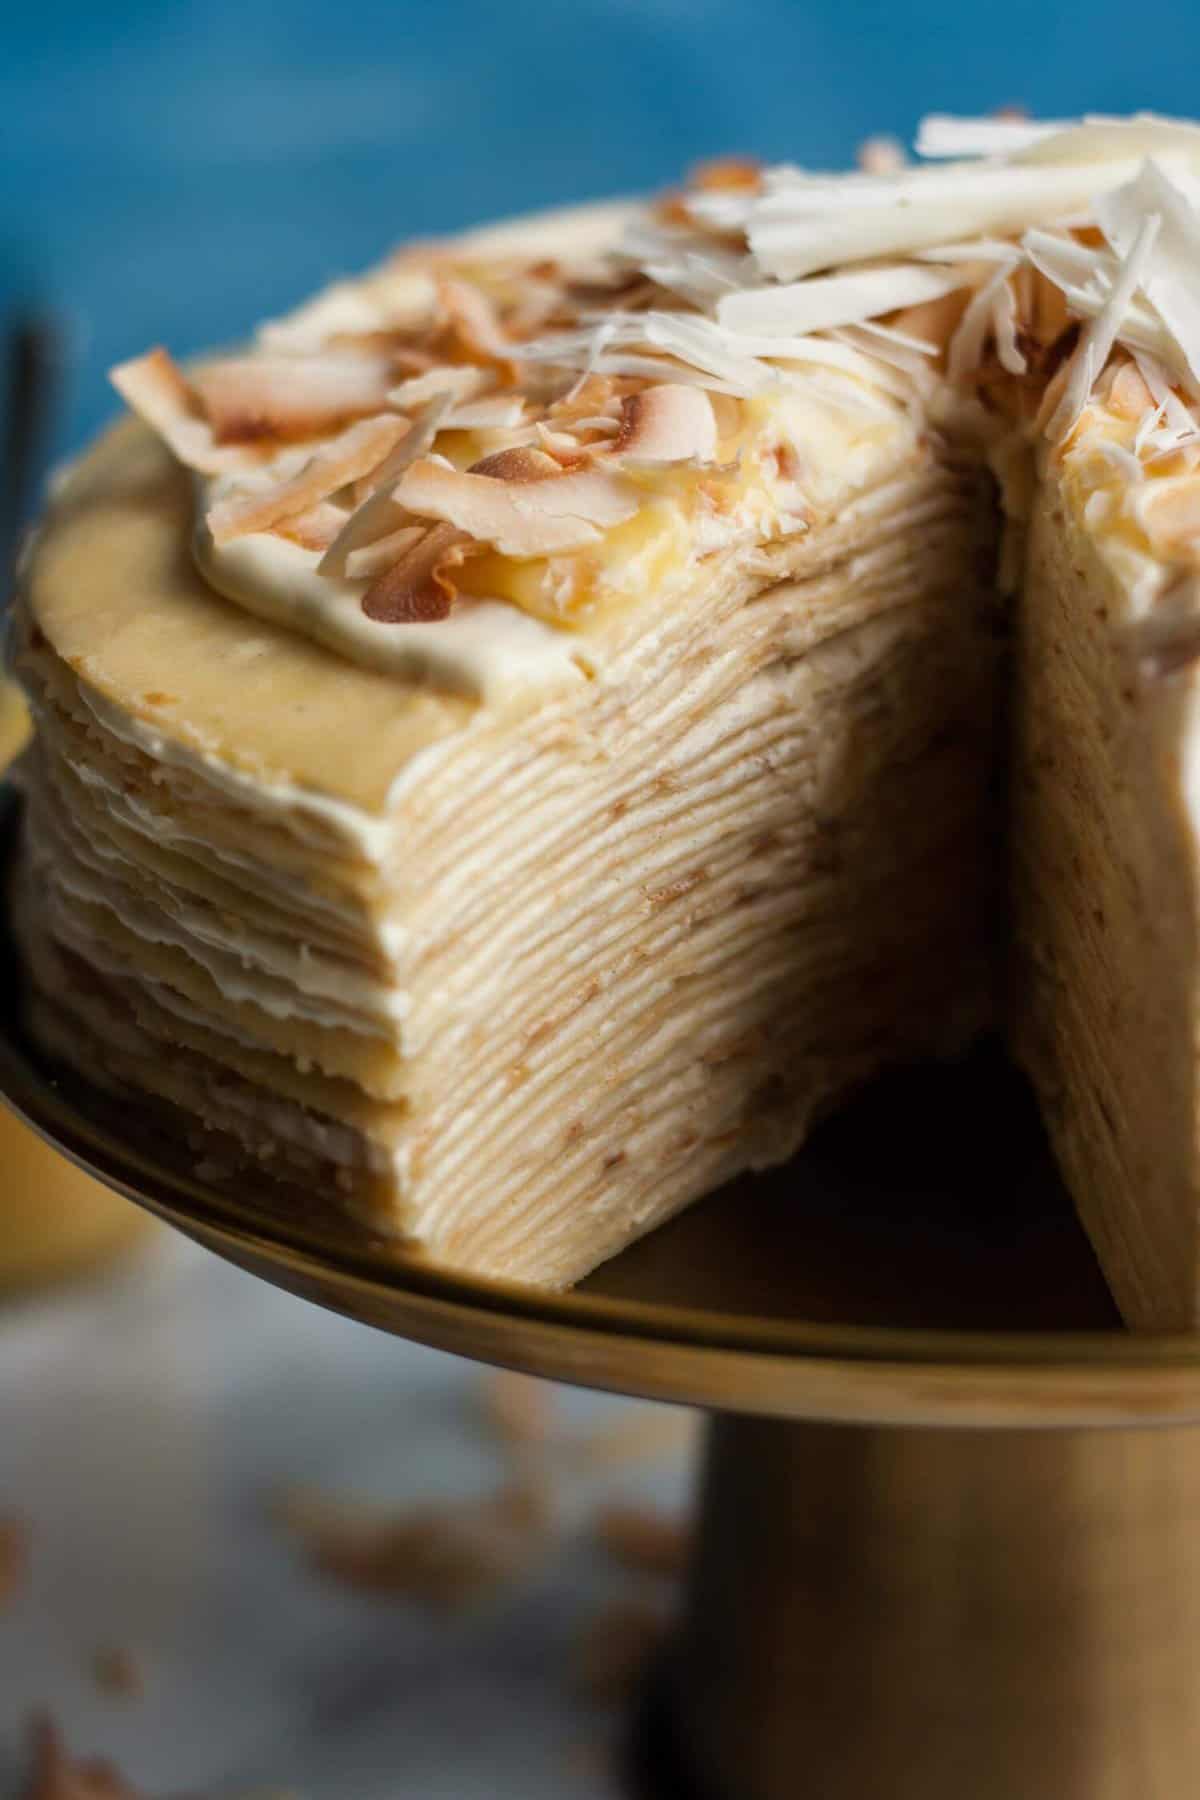 A close up showing the inside of the cut out section of crepe cake.